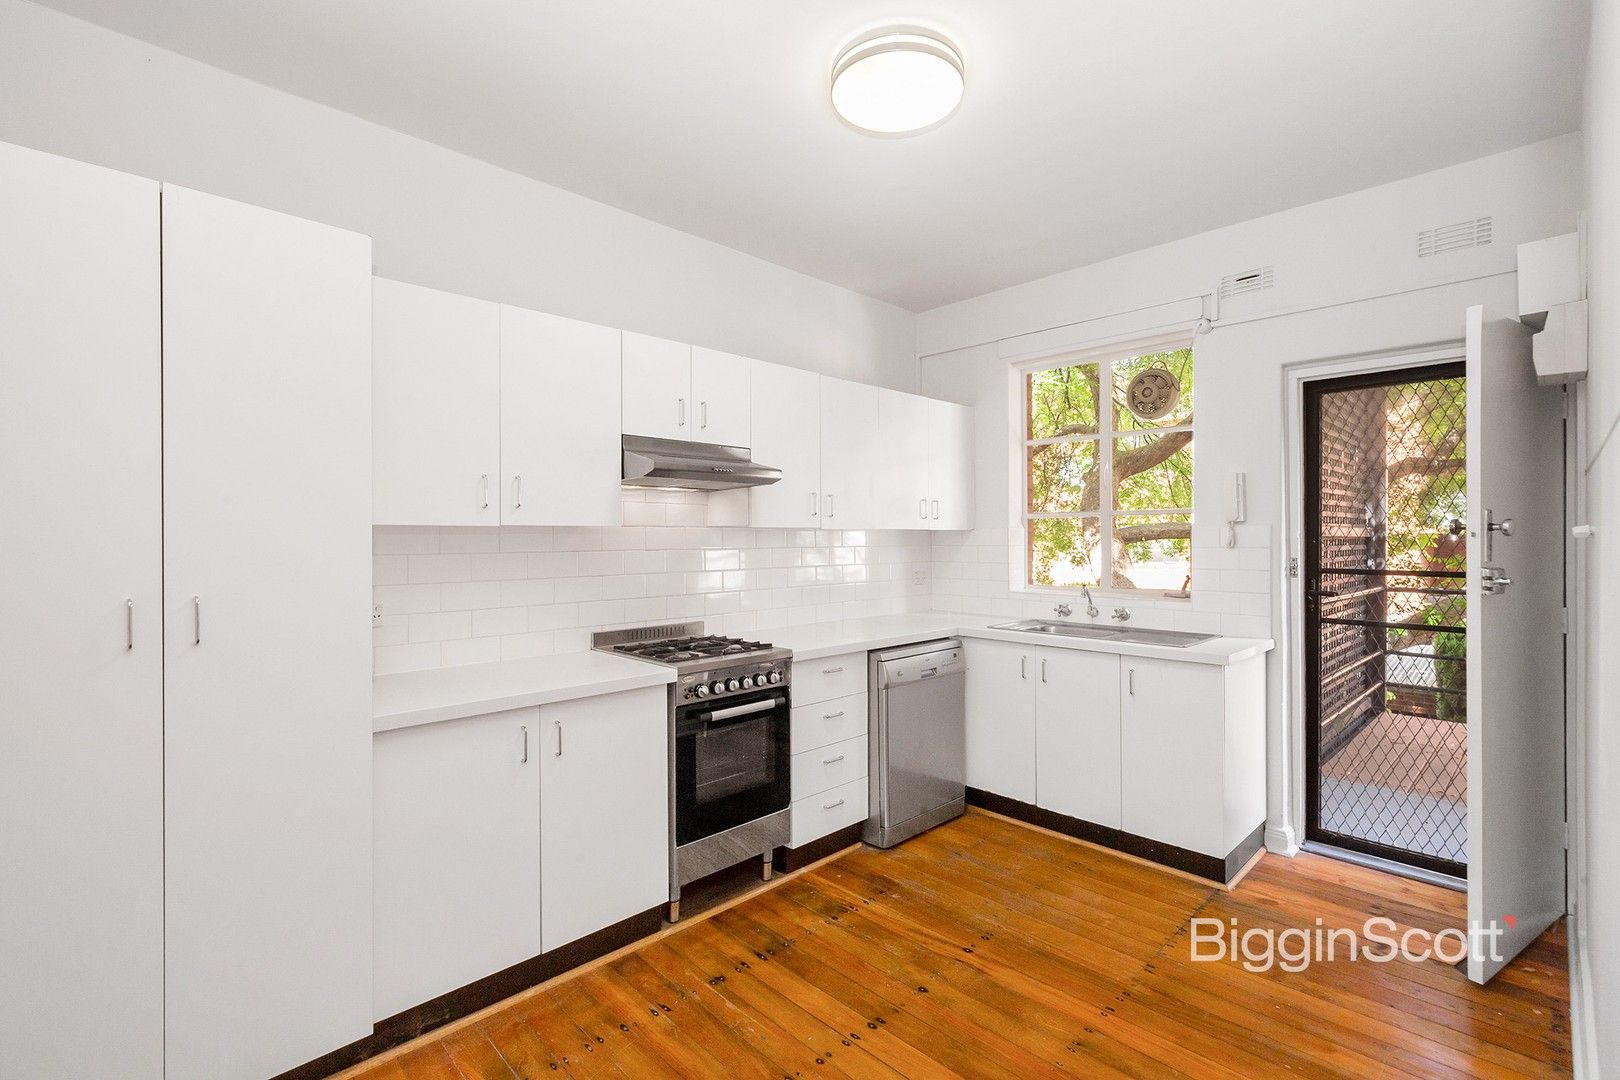 2 bedrooms Apartment / Unit / Flat in 11/58 Queens Rd MELBOURNE VIC, 3004